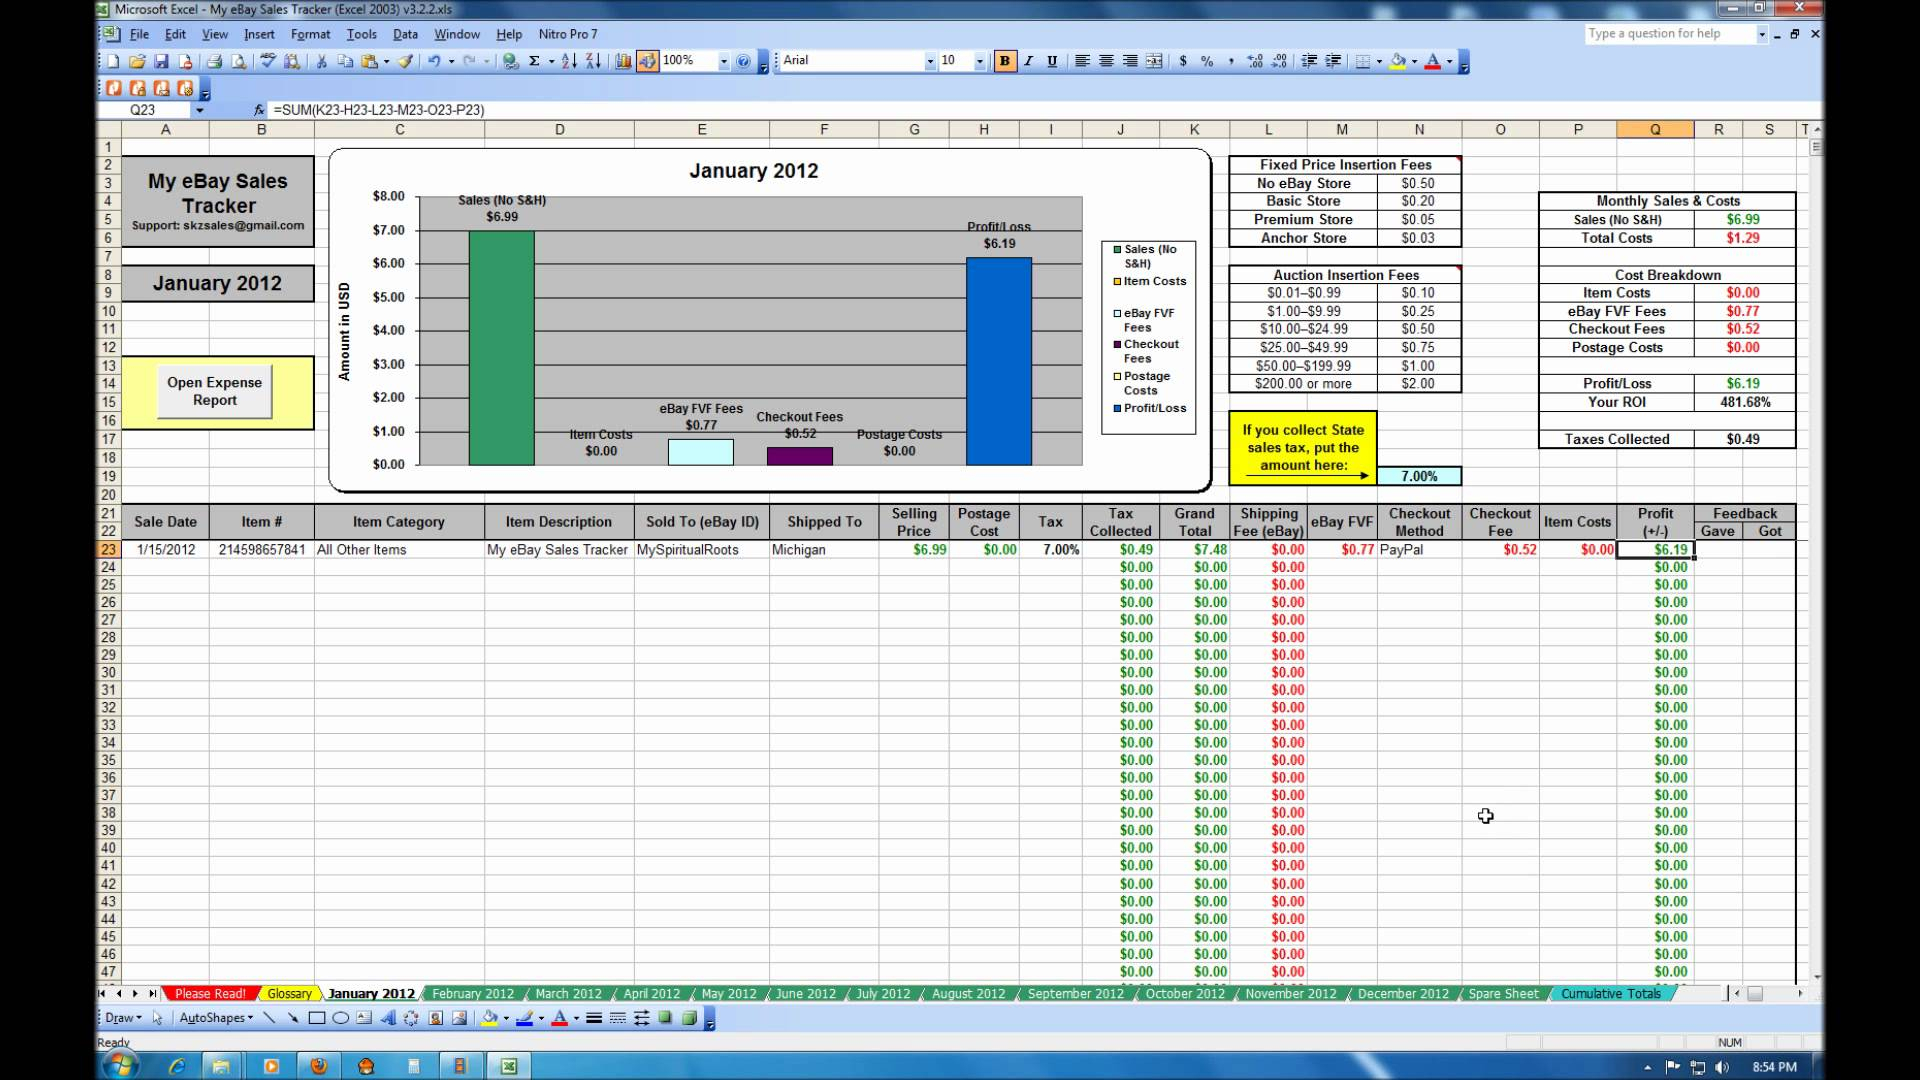 Sales Tracking Spreadsheet On Excel Spreadsheet Free Excel To How To Create A Sales Tracking Spreadsheet